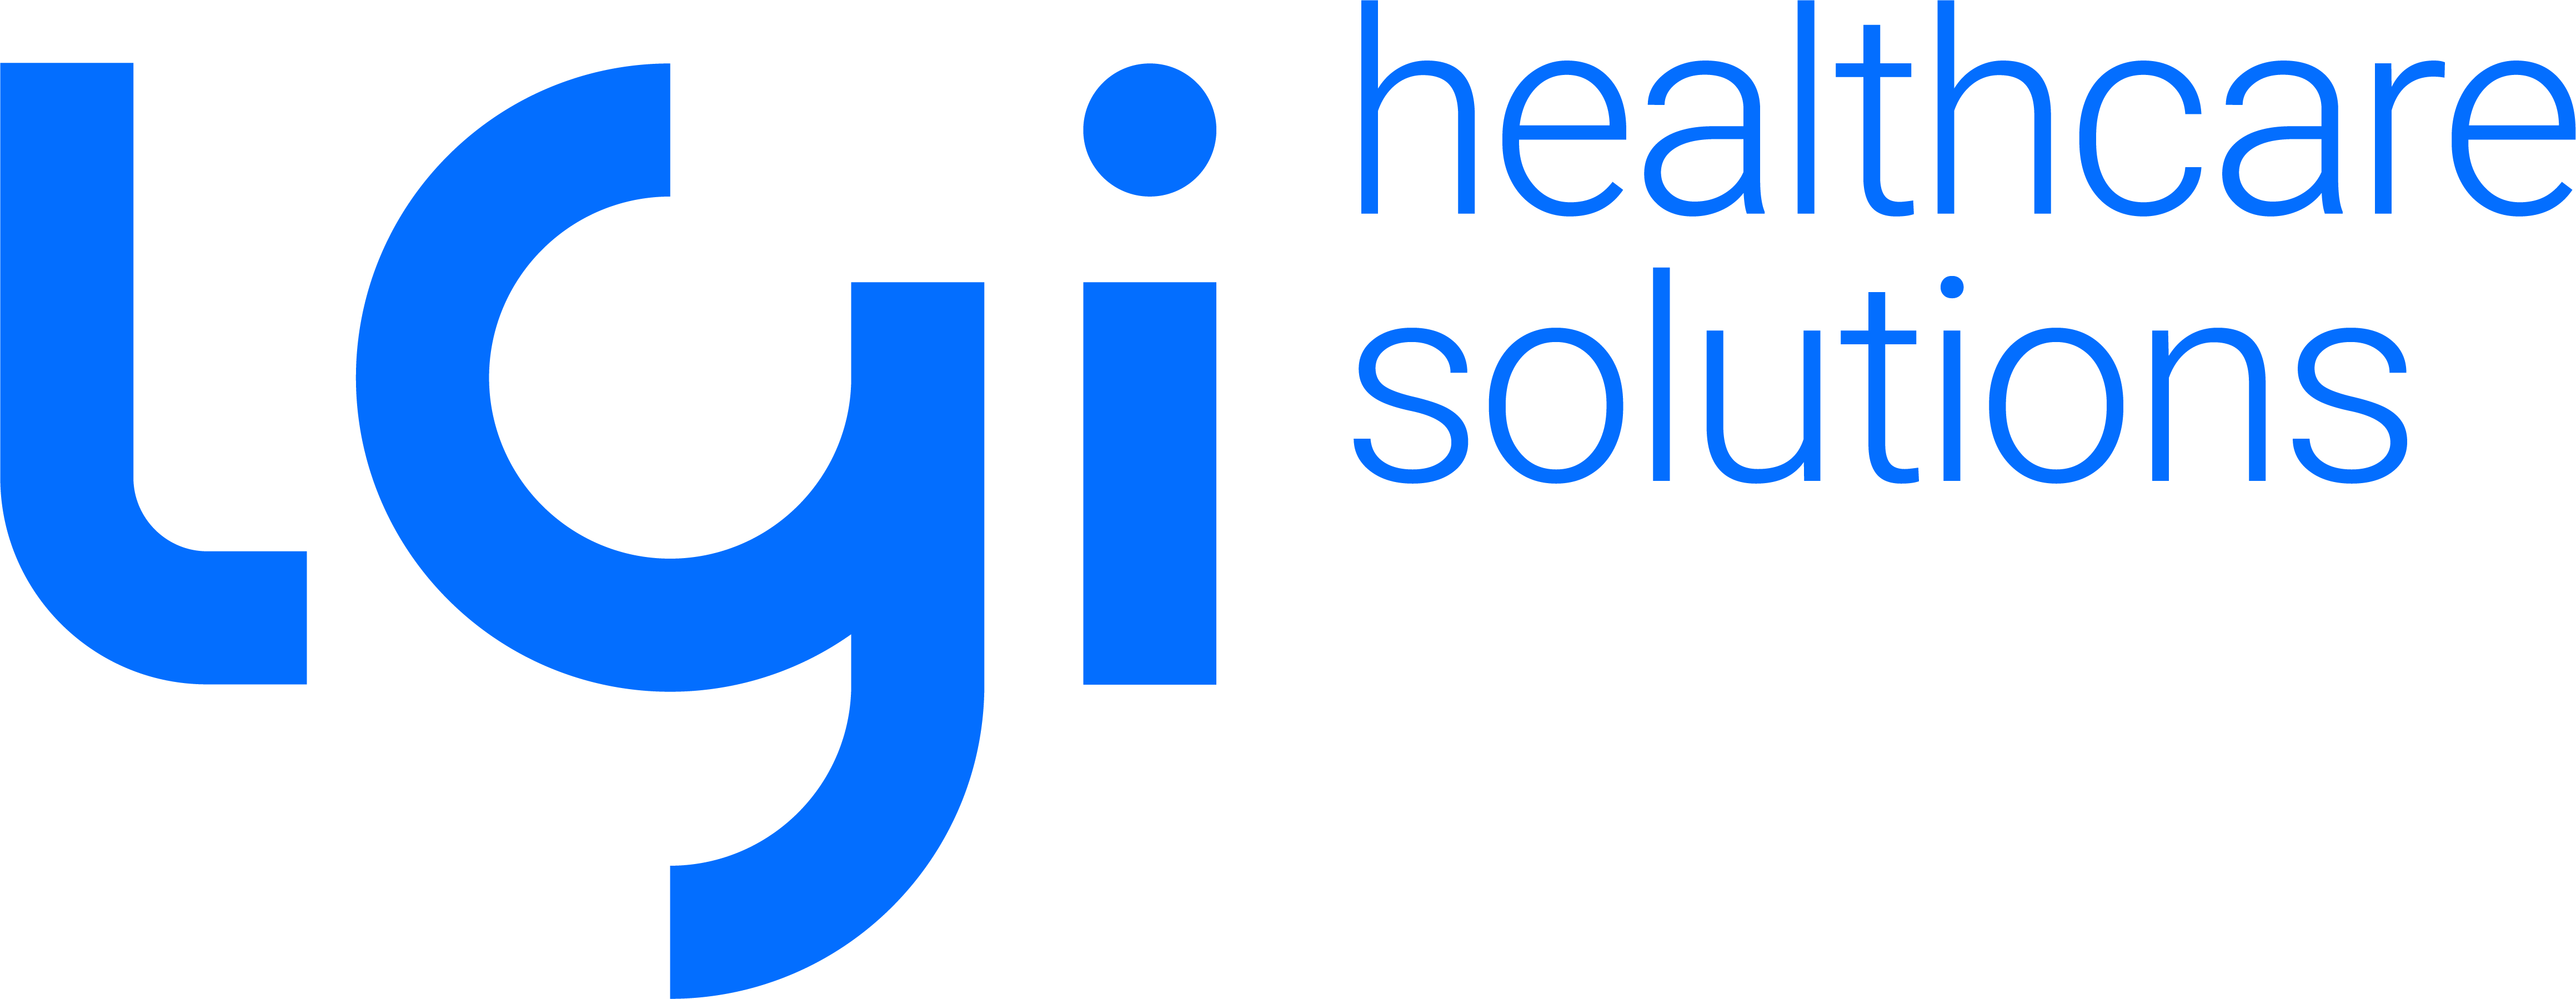 LGI Healthcare Solutions Acquires Boston Software Systems